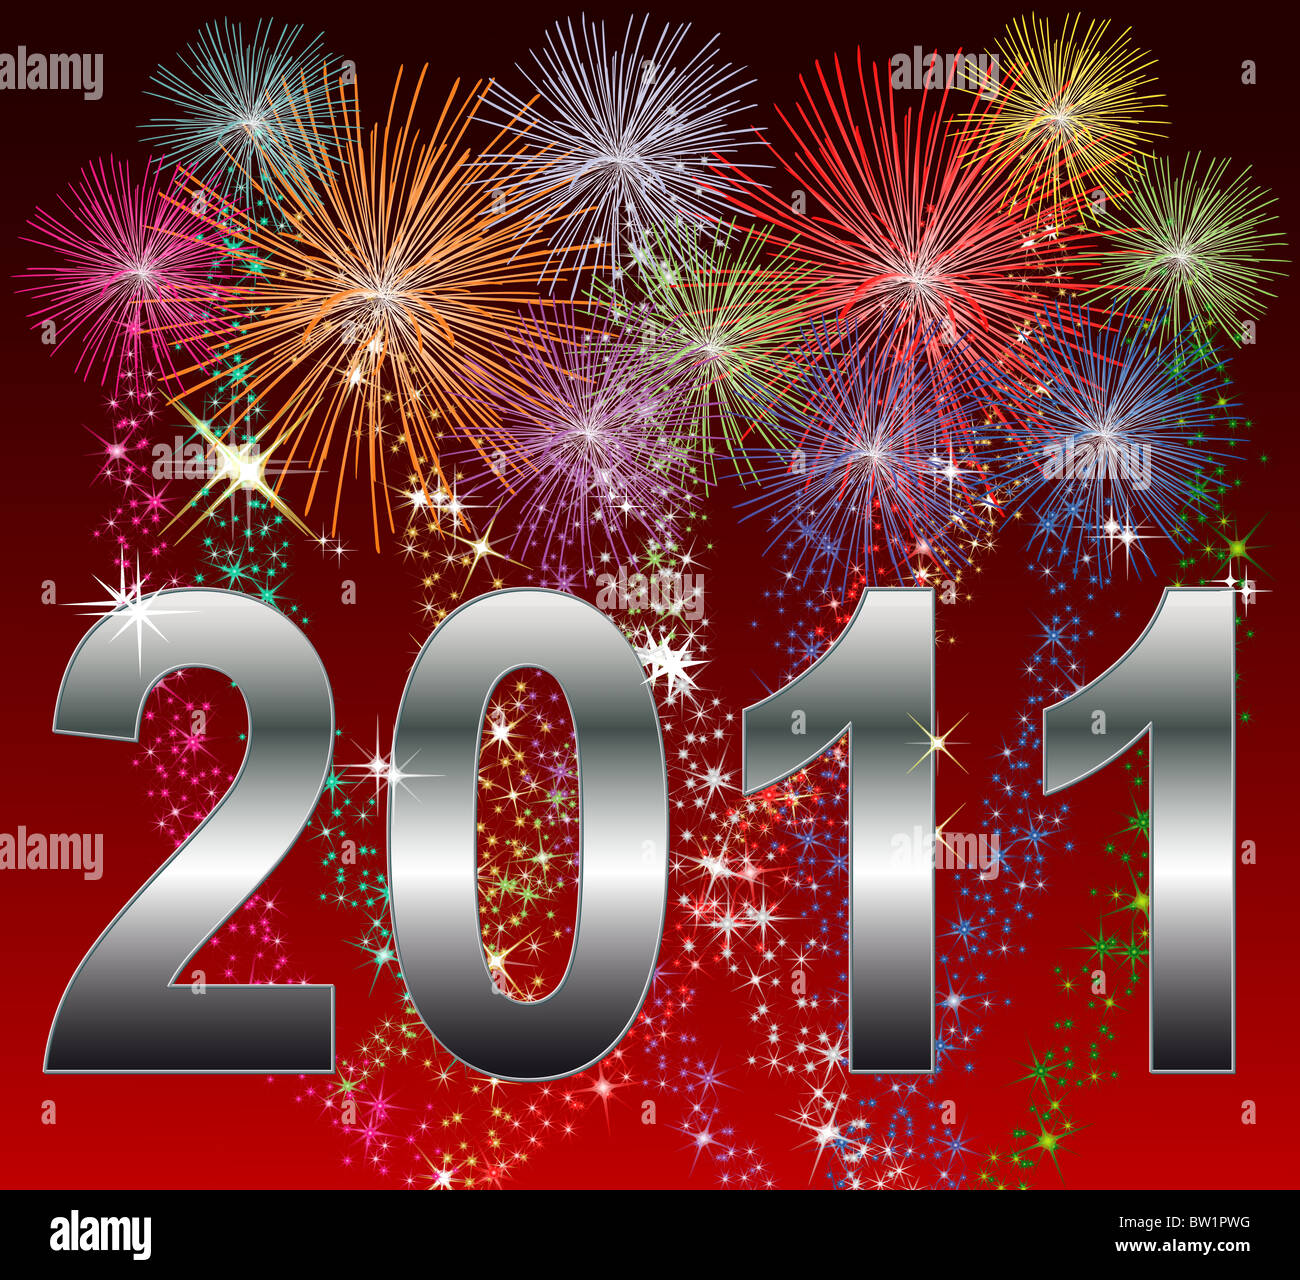 Illustration of a Happy New Year 2011 Background Stock Photo